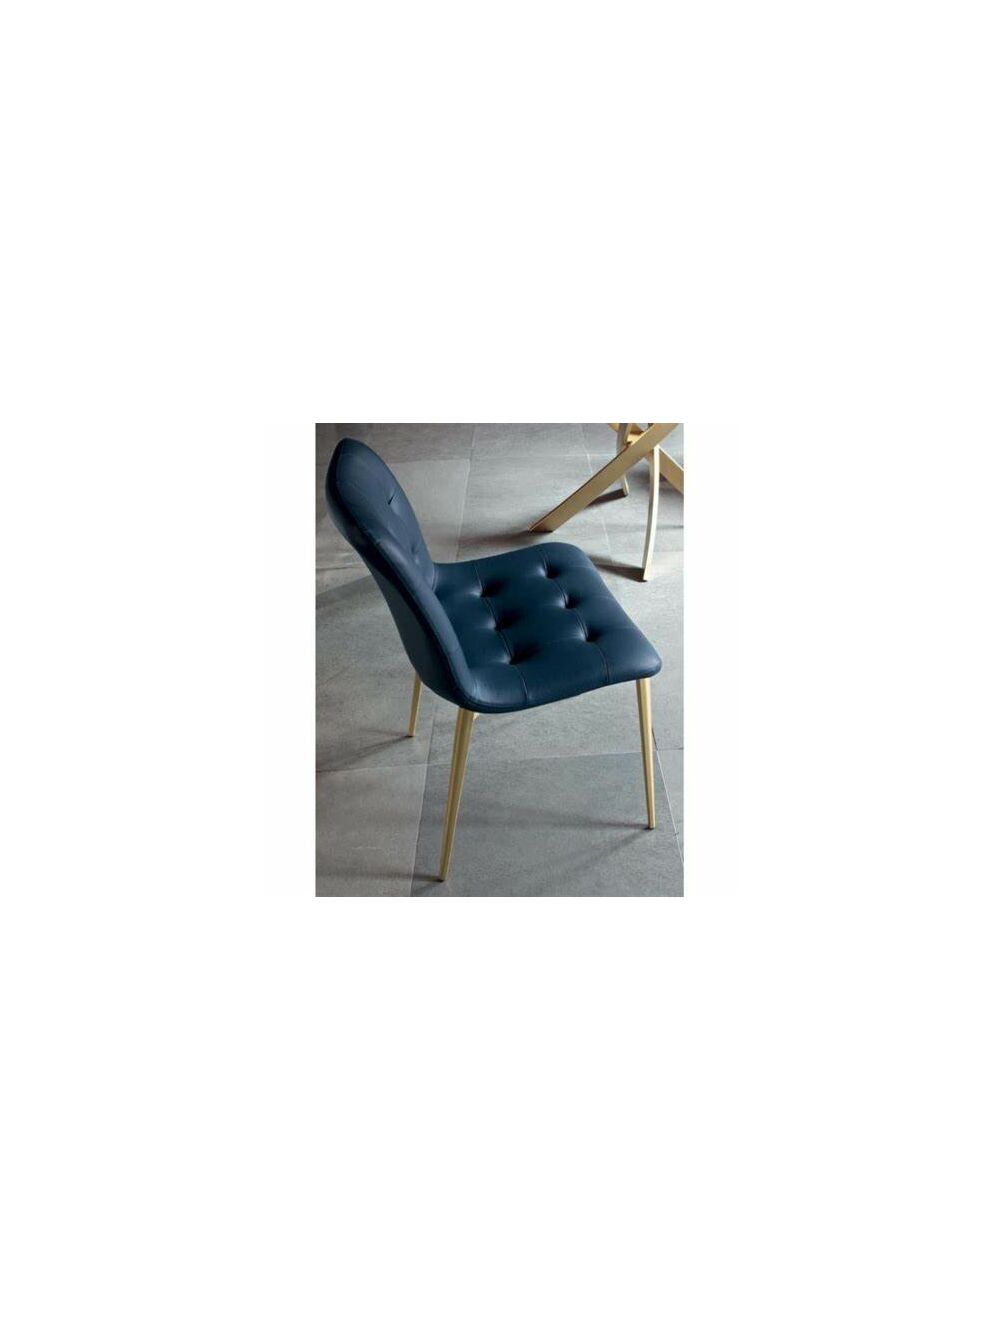 Ex-Display *50%* Discount - 6 X Bontempi Kuga Slim Dining Chairs - Premium Nappa Leather Air Force Blue With Natural Silver Legs